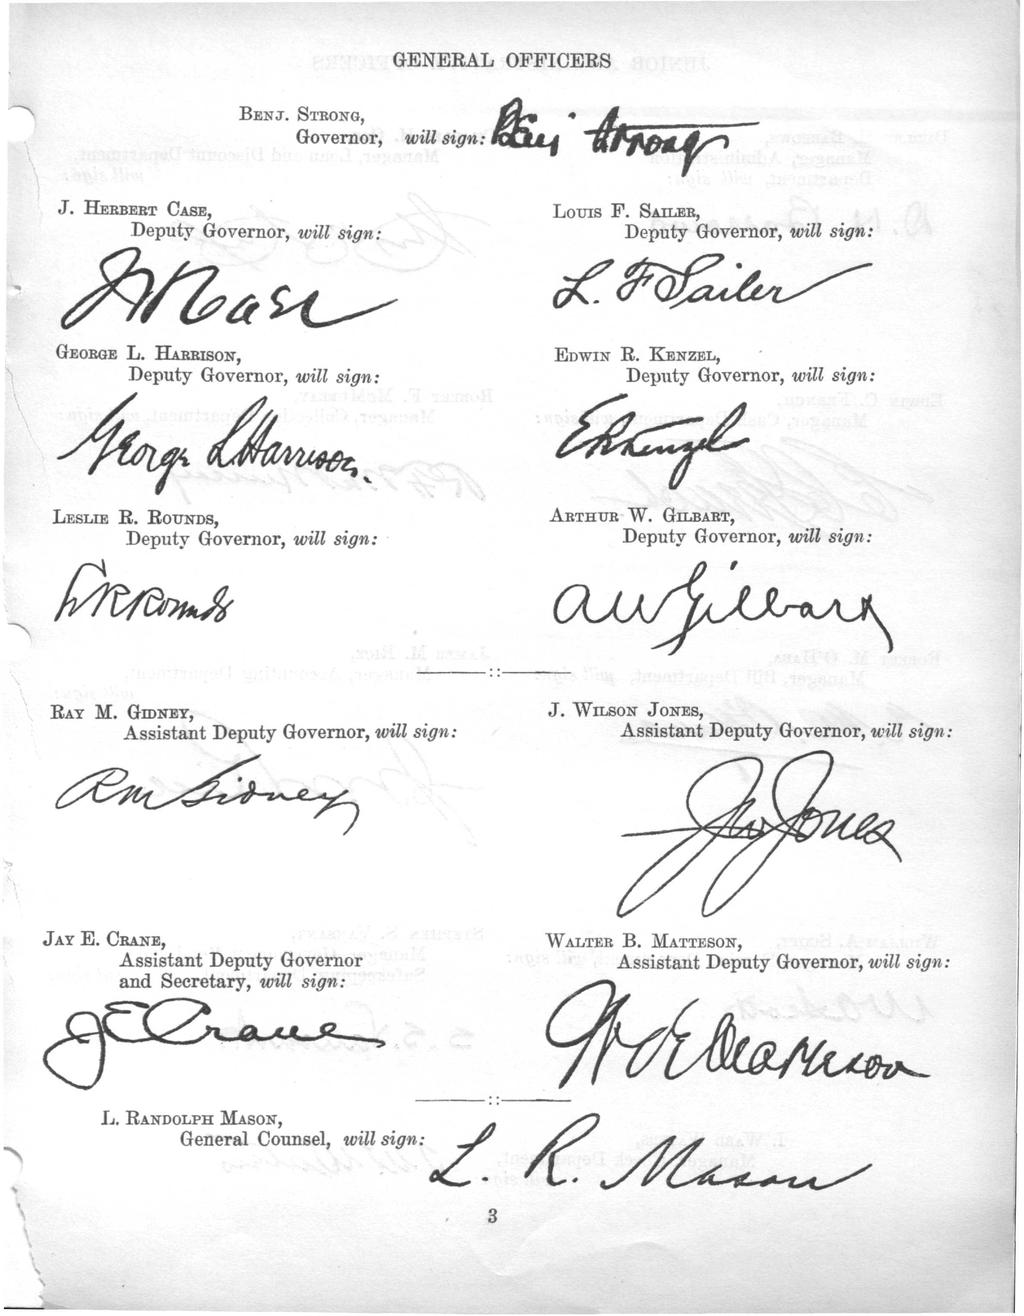 GENERAL OFFICERS BENJ. STRONG, Governor, J. HERBERT CASE, Deputy Governor, Louis F. SAILER, Deputy Governor, will sign. GEORGE L. HARRISON, Deputy Governor, will sign, EDWIN R.